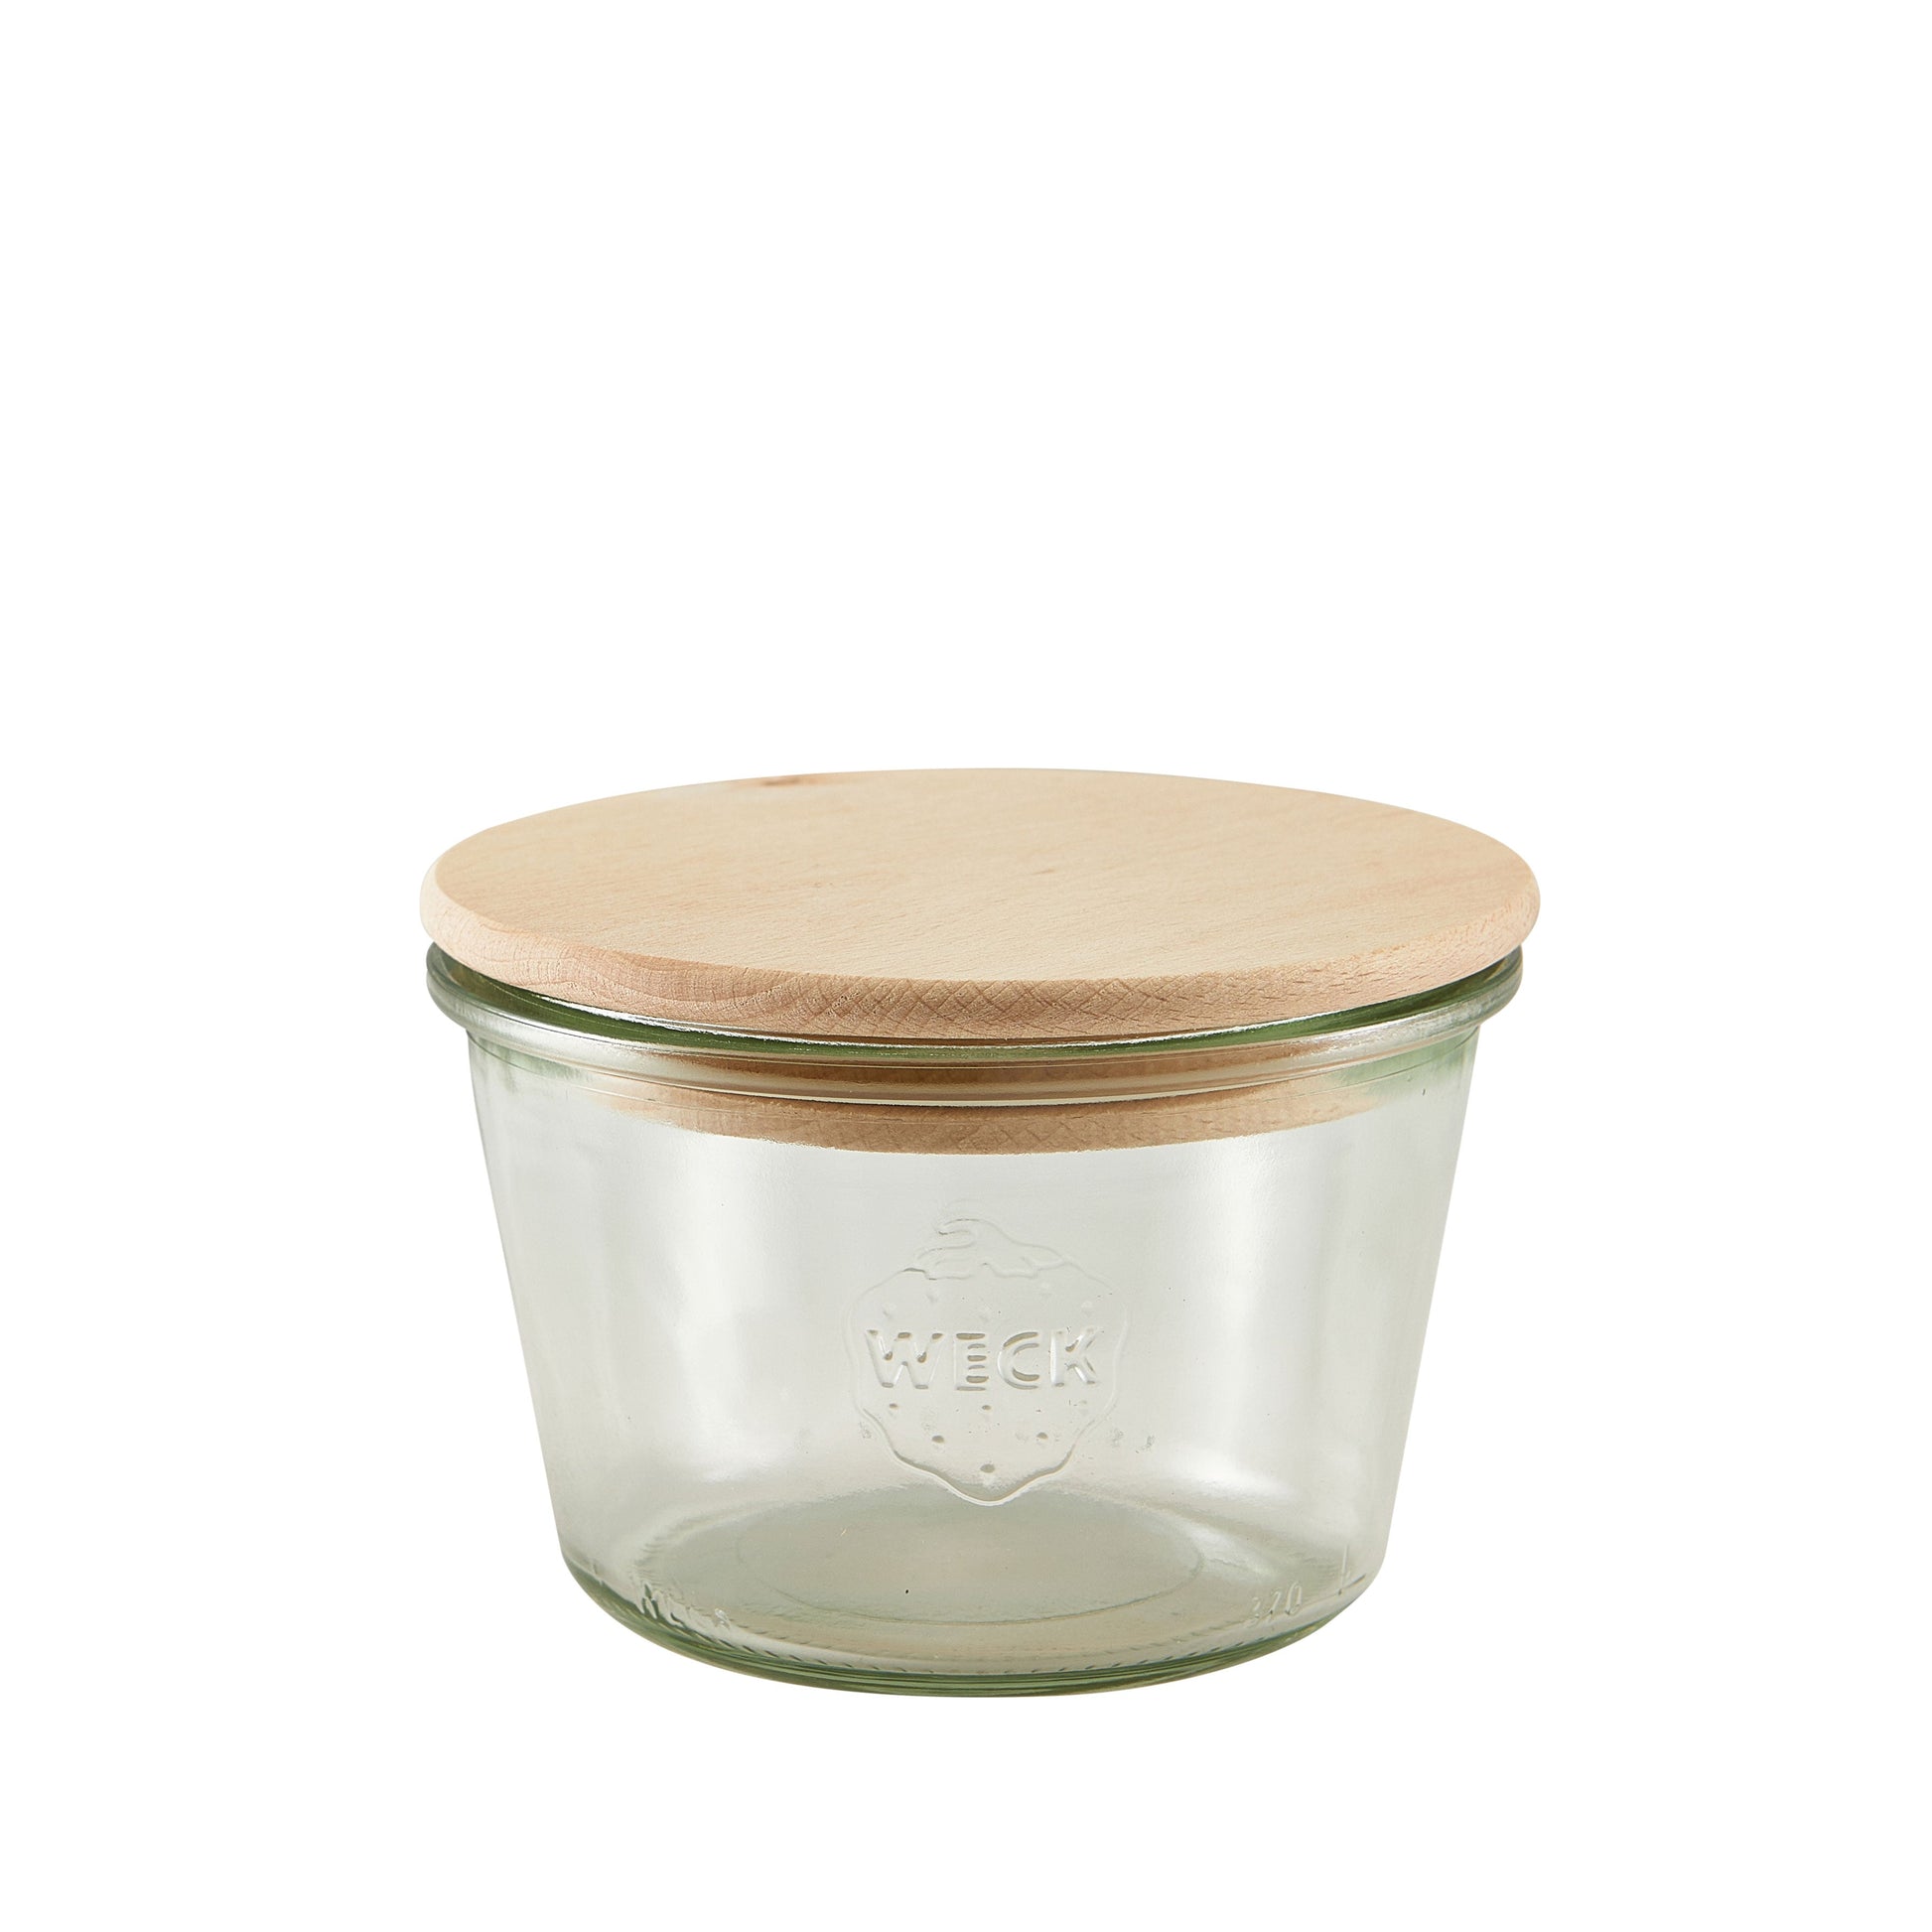 Weck Jar with Wooden Lid 37cl/13oz (Dia) 6pk